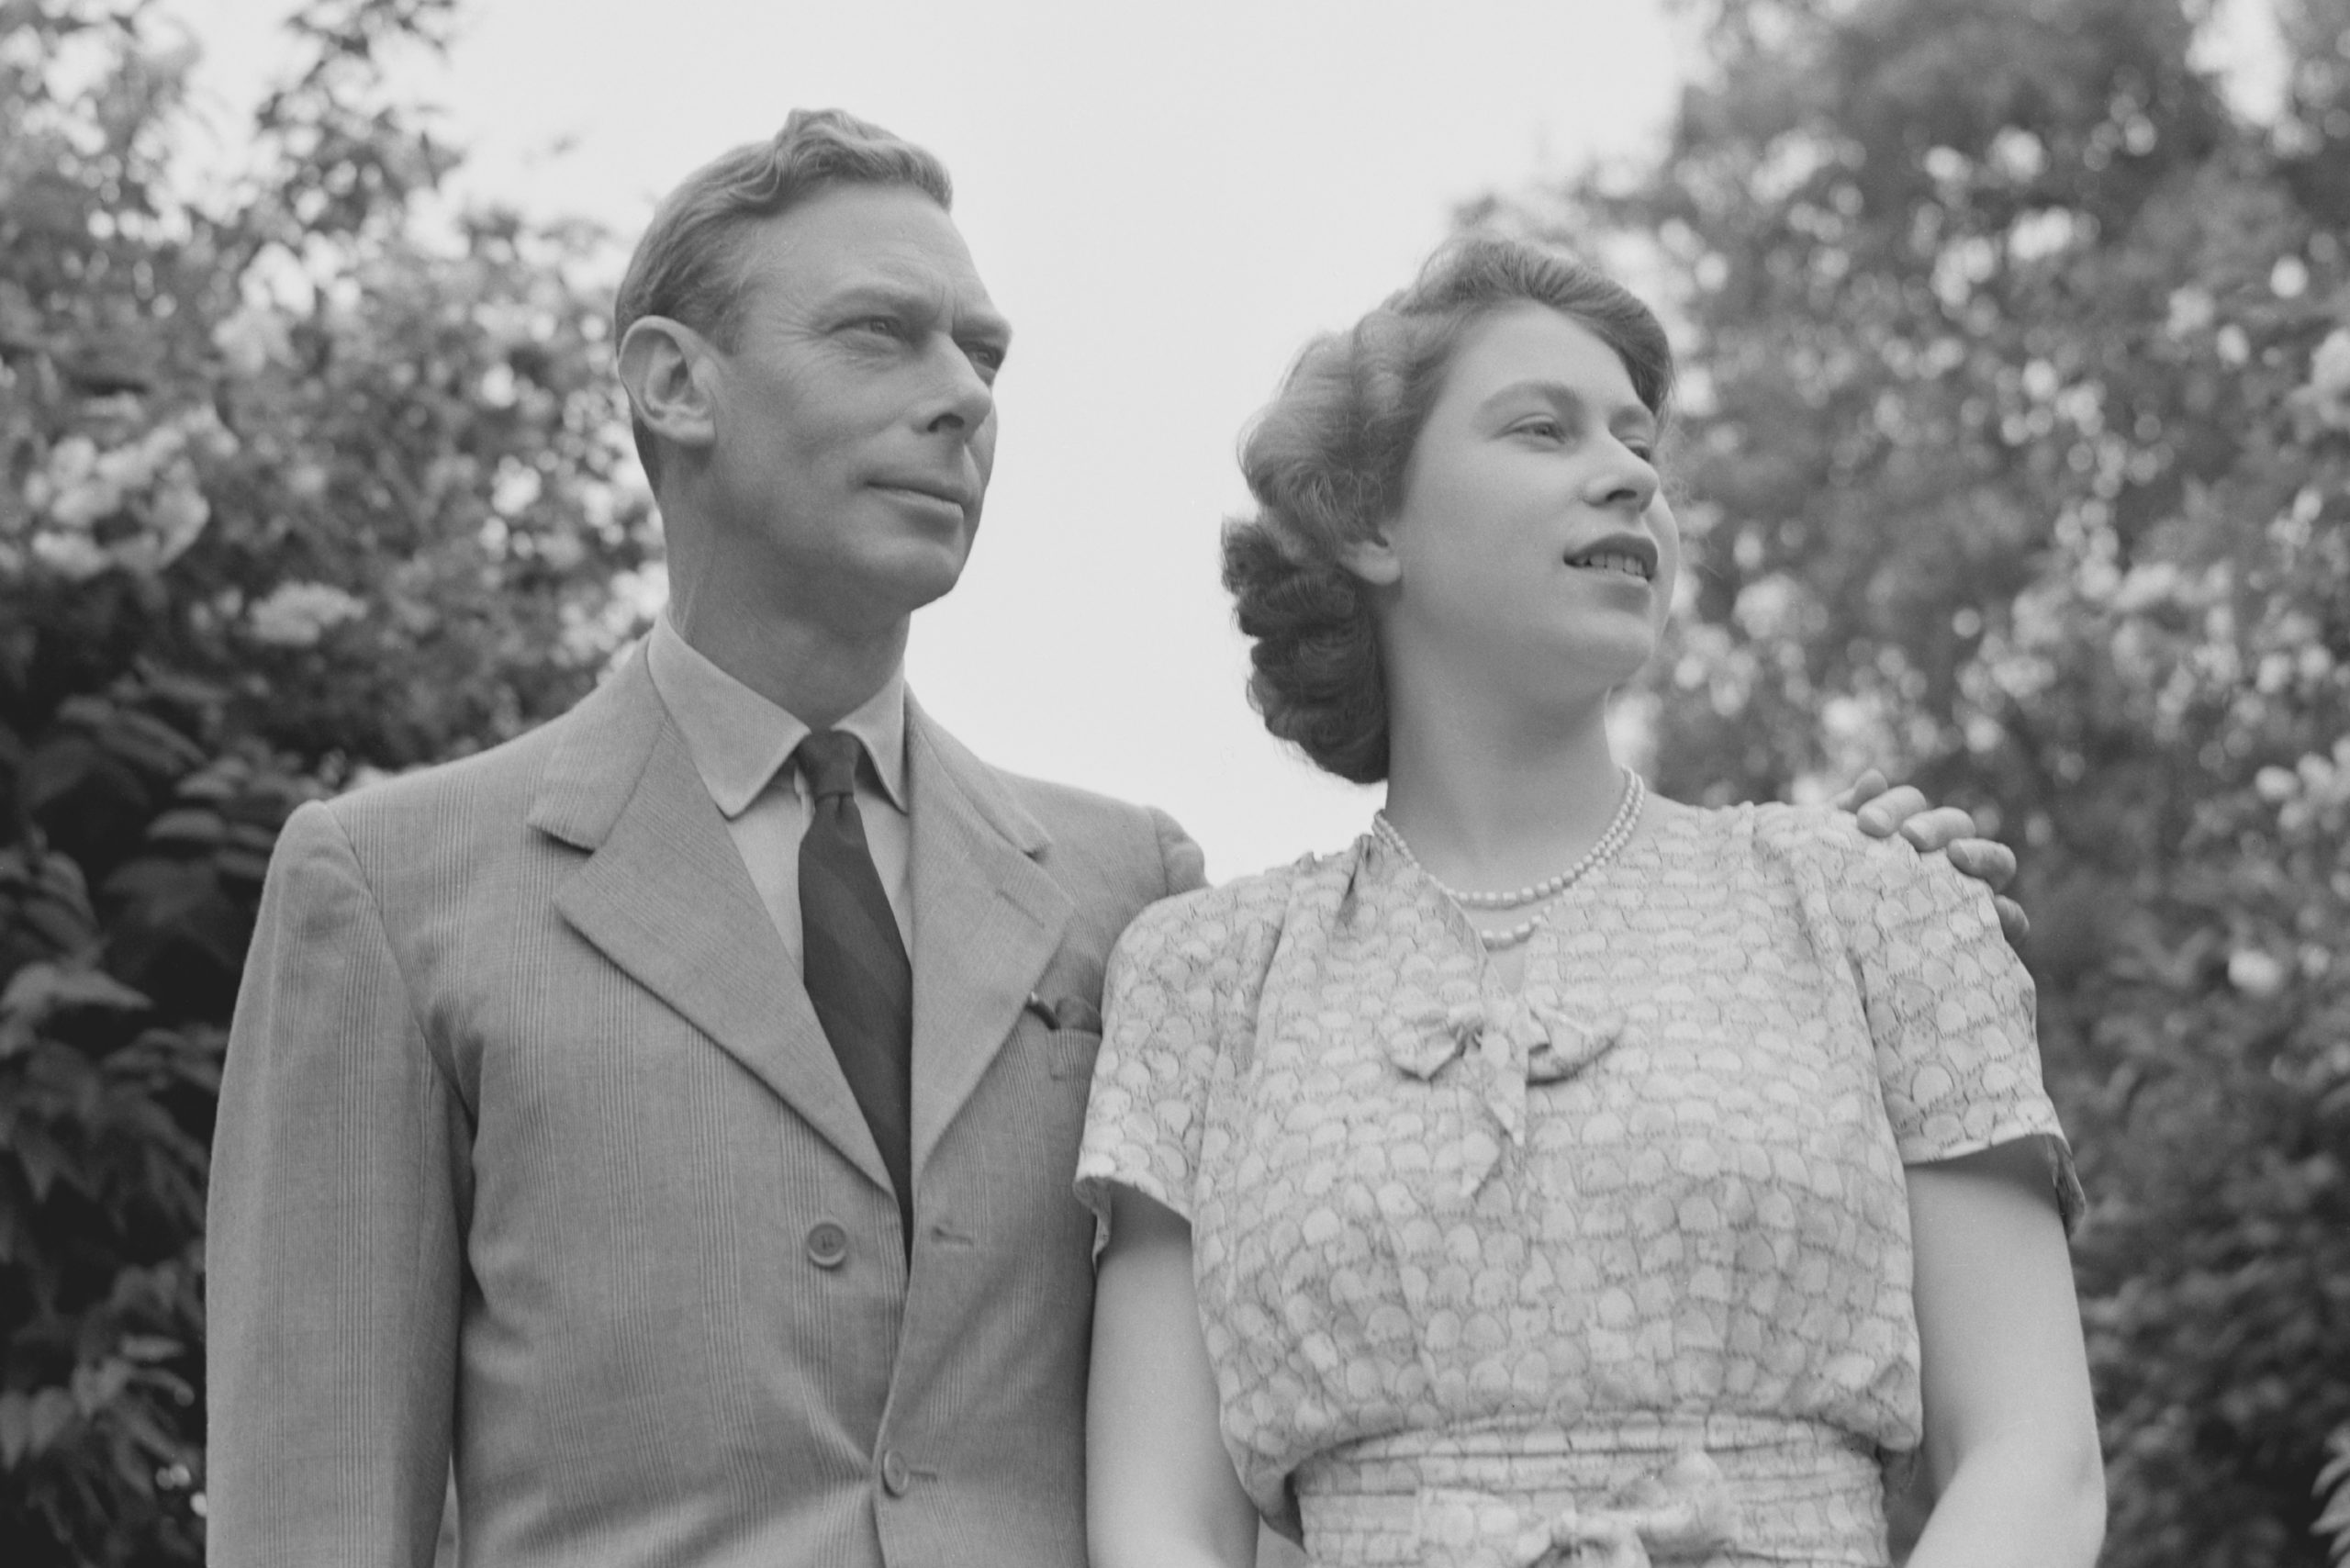 Meet Queen Elizabeth Iis Father Who Prepared Her For The Throne